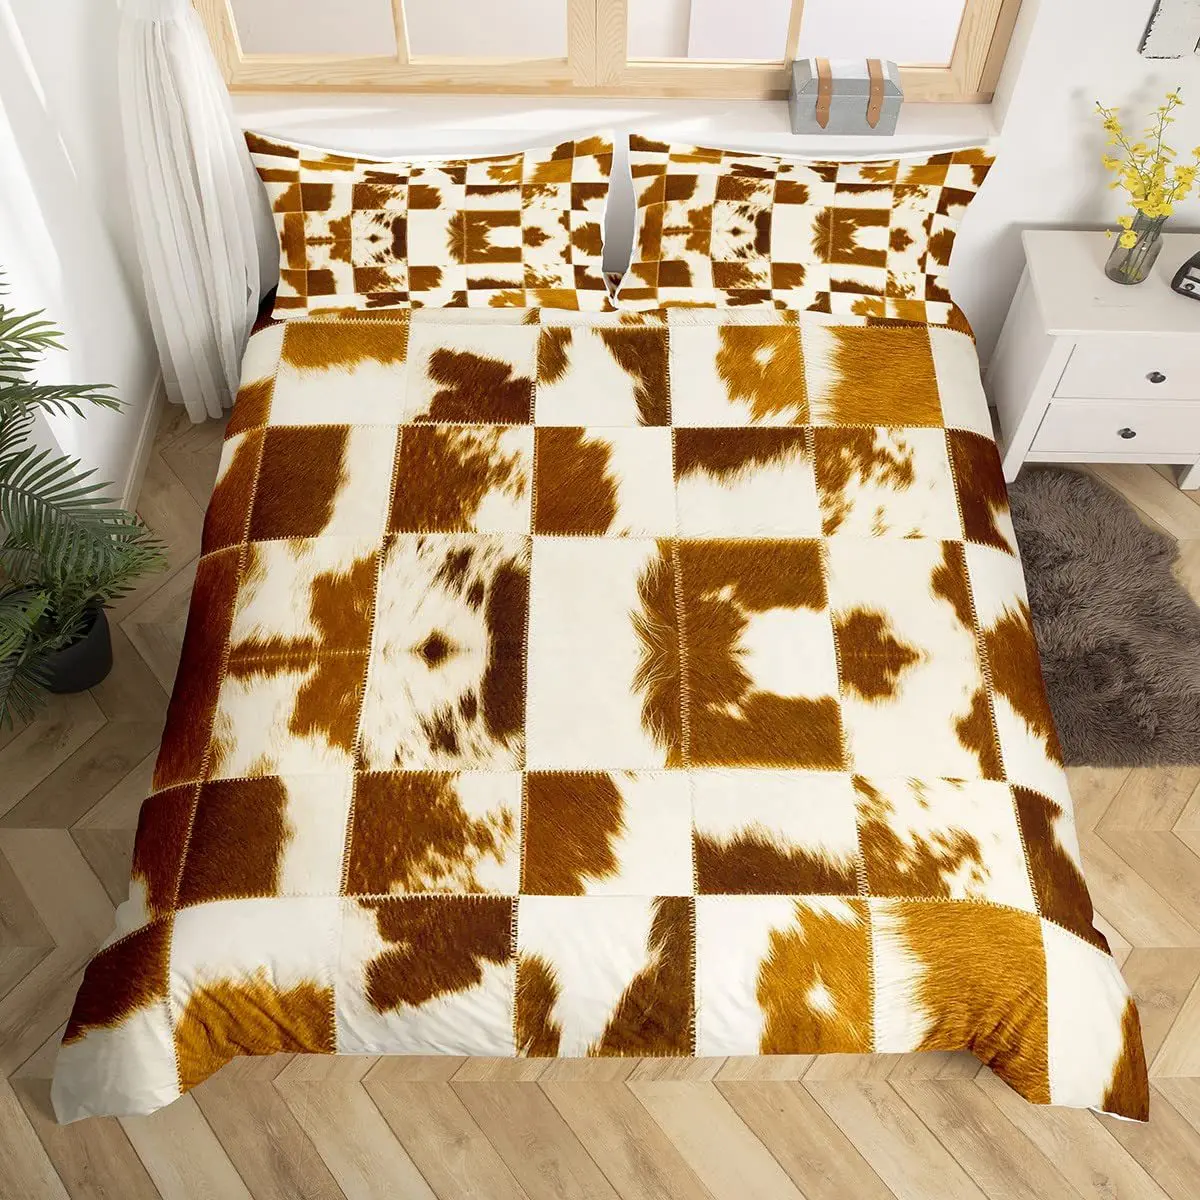 Cowhide King Queen Duvet Cover Patchwork Cow Fur Print Bedding Set Animal Quilt Cover Western Cowboy polyester Comforter Cover images - 6